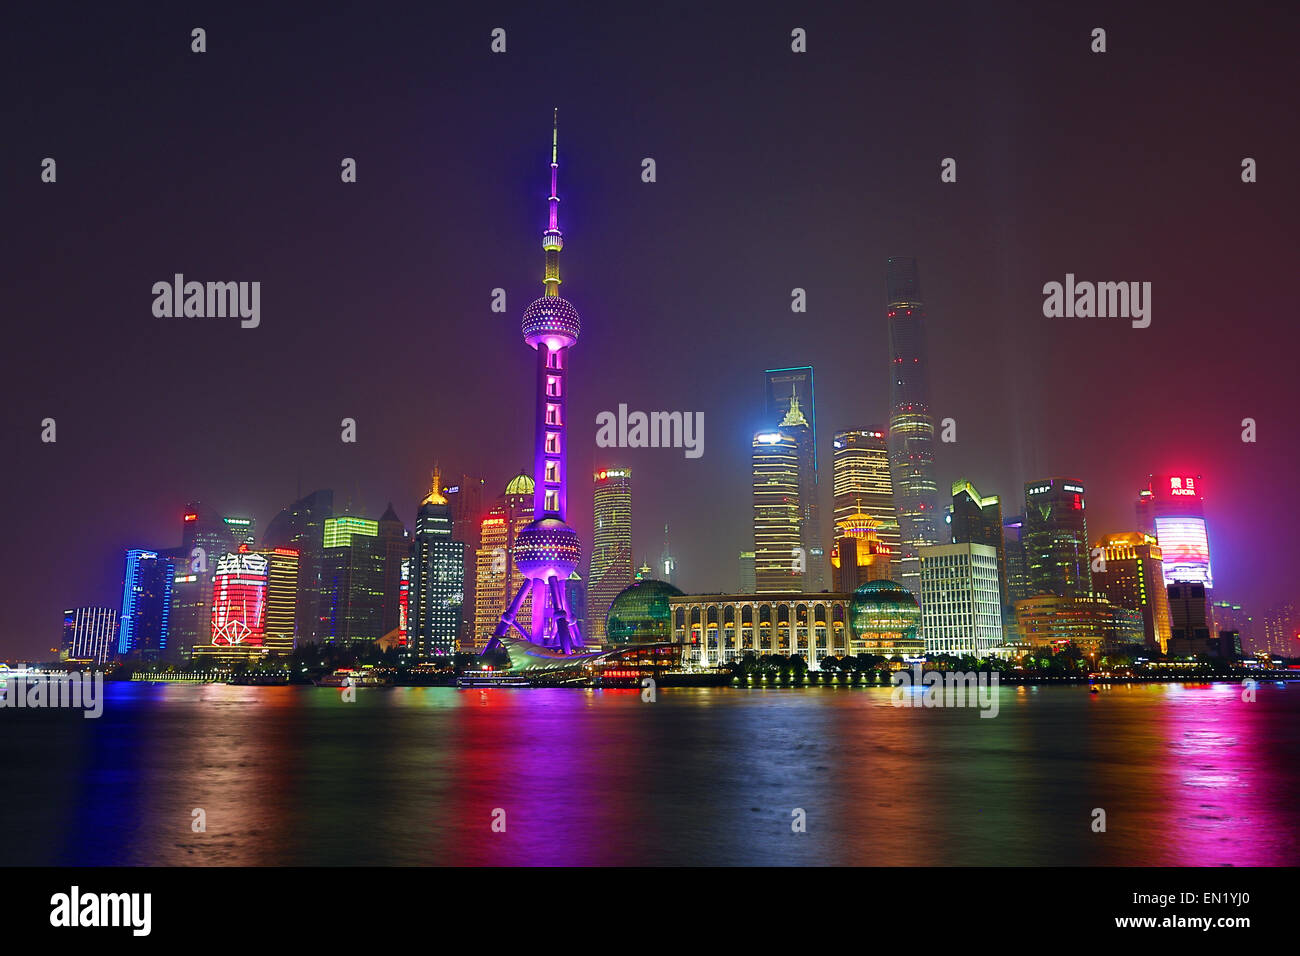 General view of the Pudong city skyline in Shanghai at night with the Oriental Pearl TV Tower, Shanghai, China Stock Photo